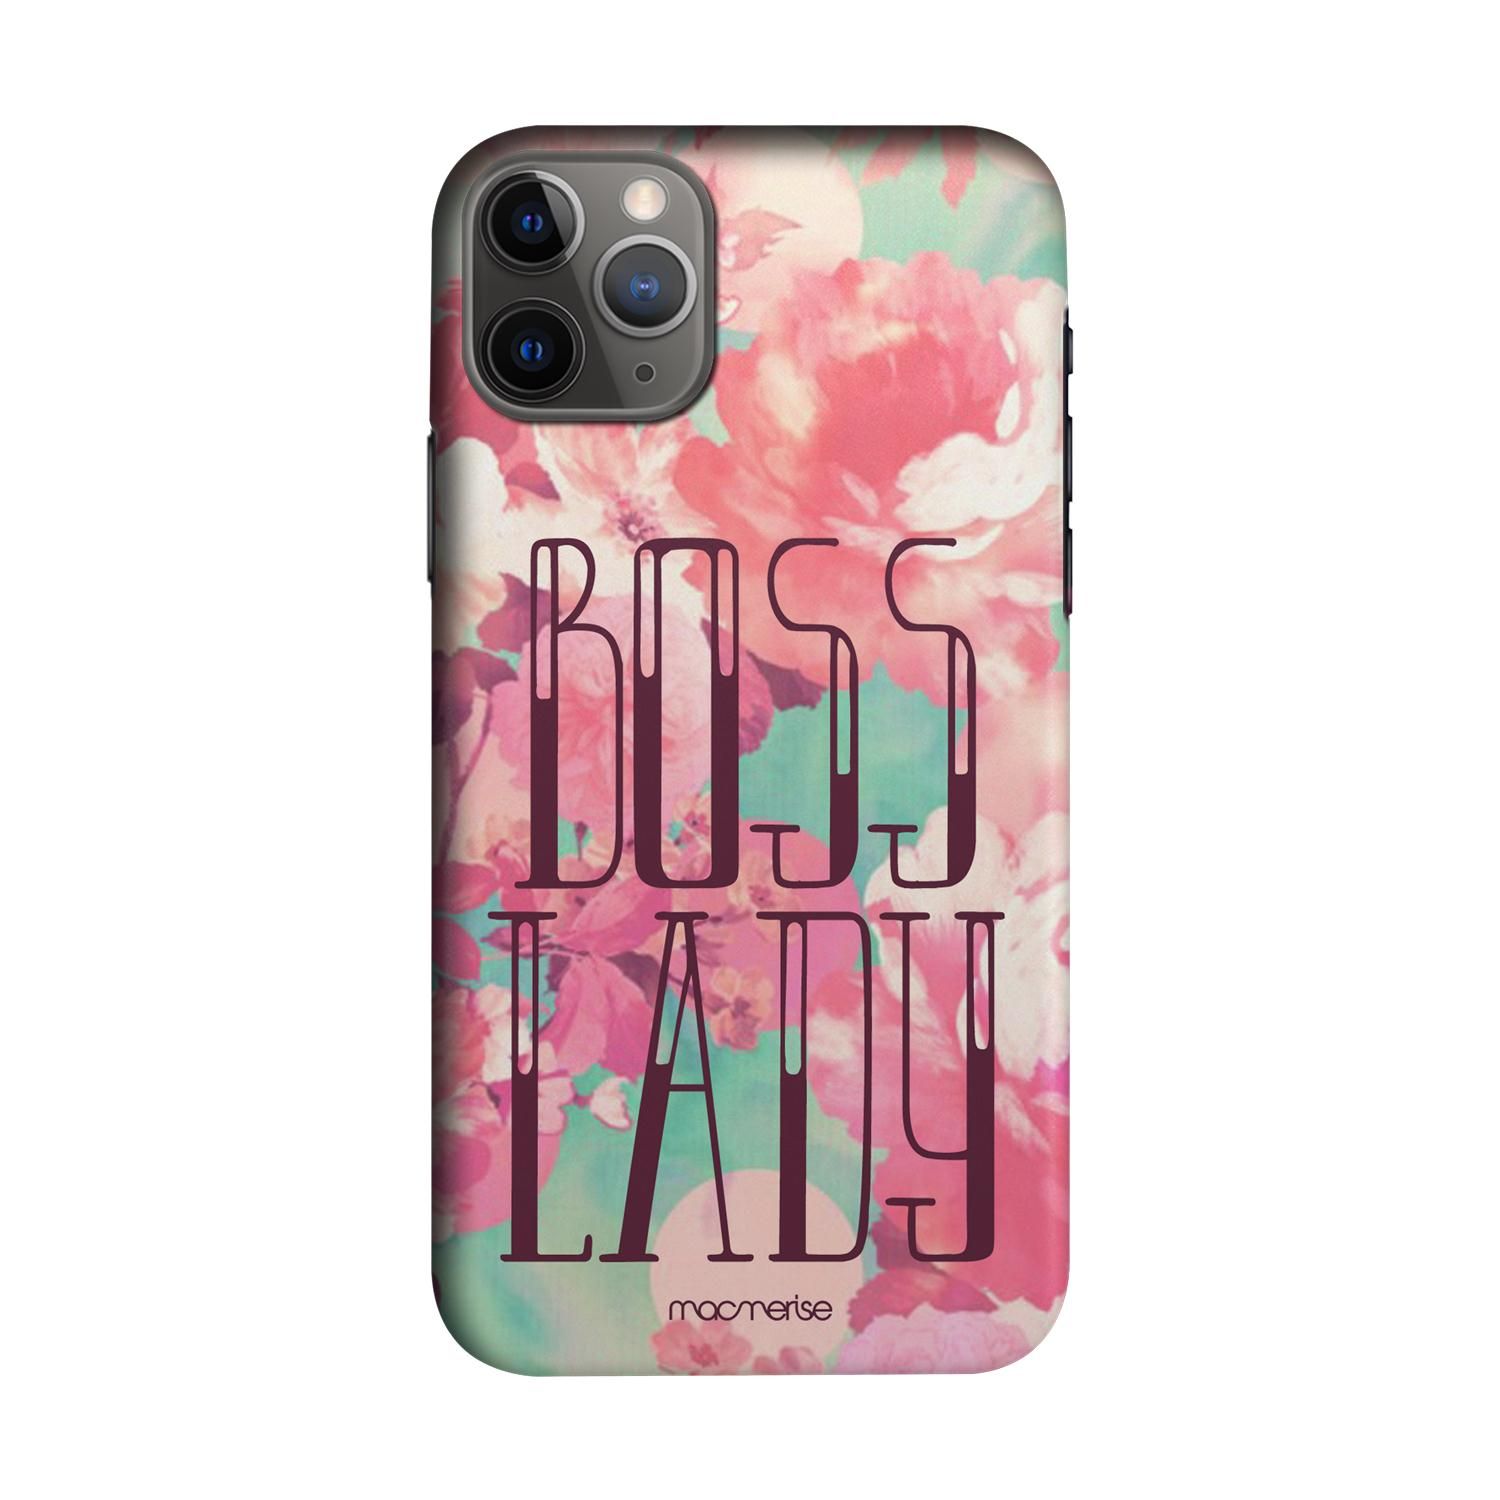 Buy Boss Lady - Sleek Phone Case for iPhone 11 Pro Max Online